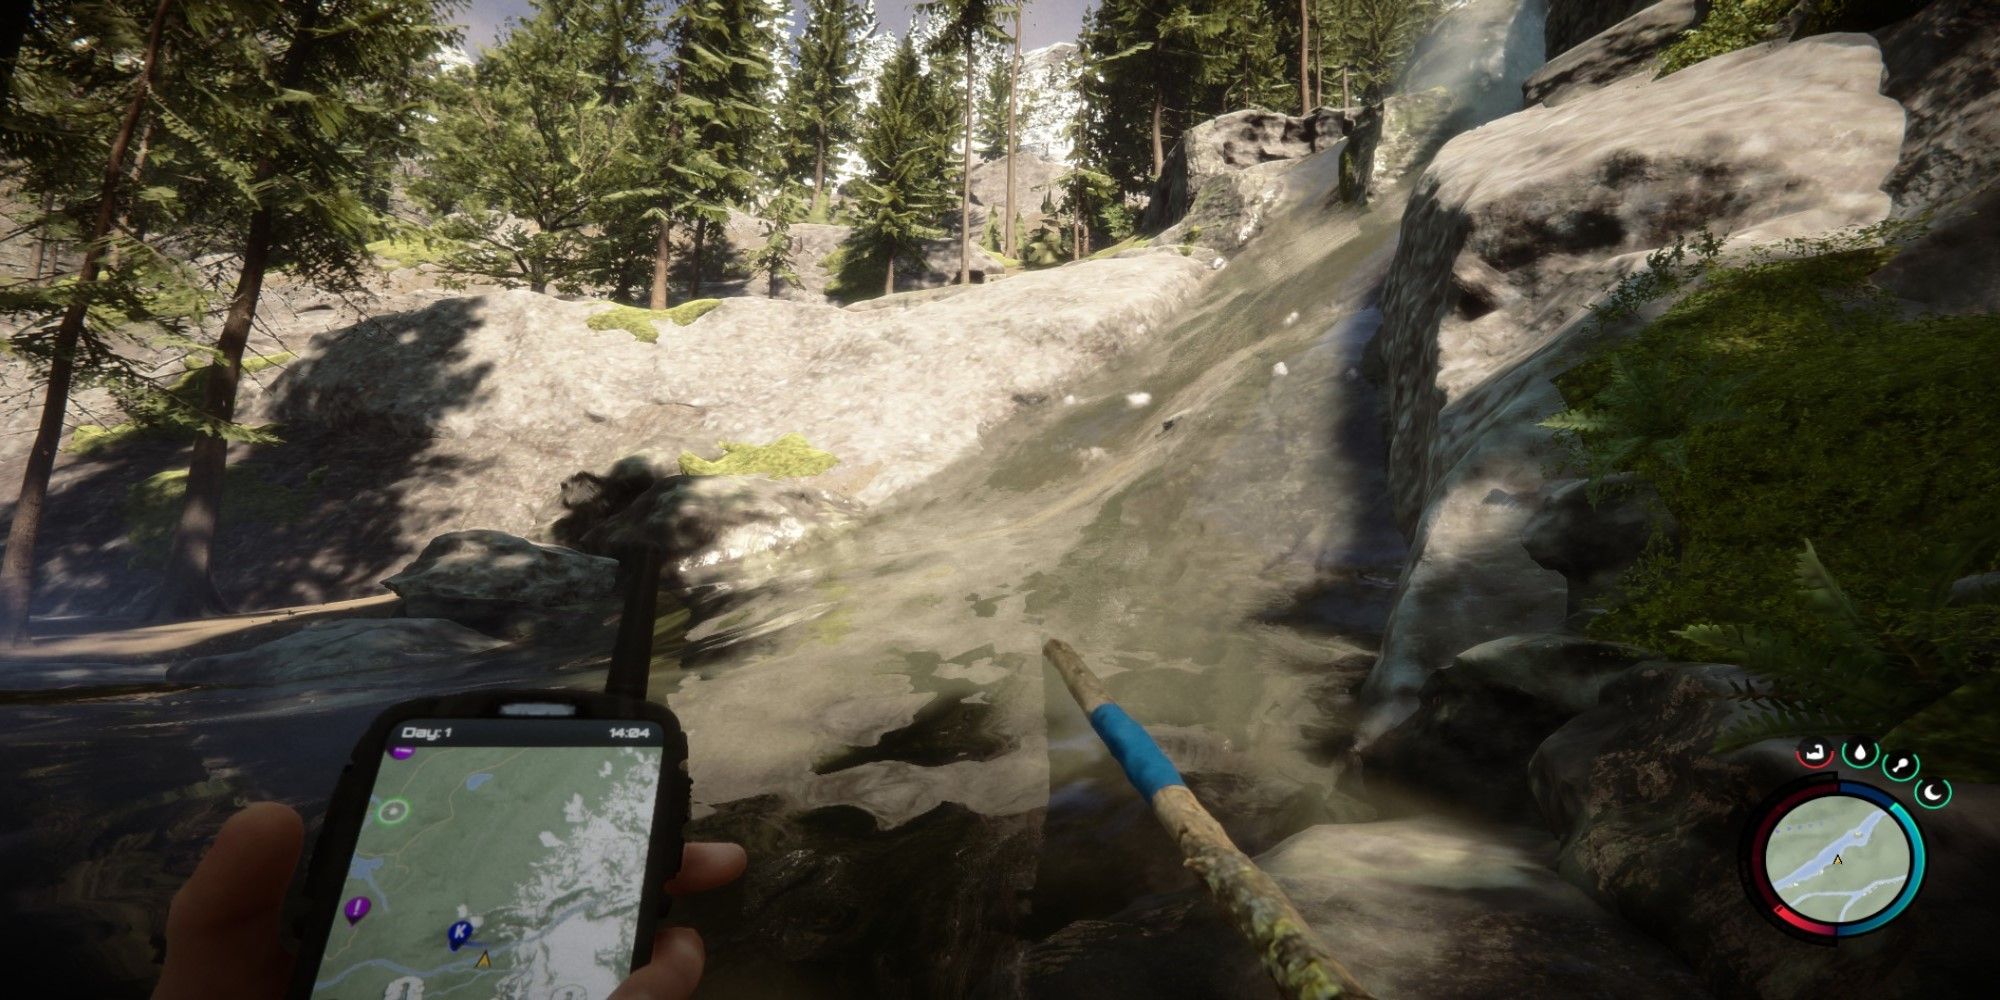 The children of the jungle player hold a GPS and a spear in front of a waterfall